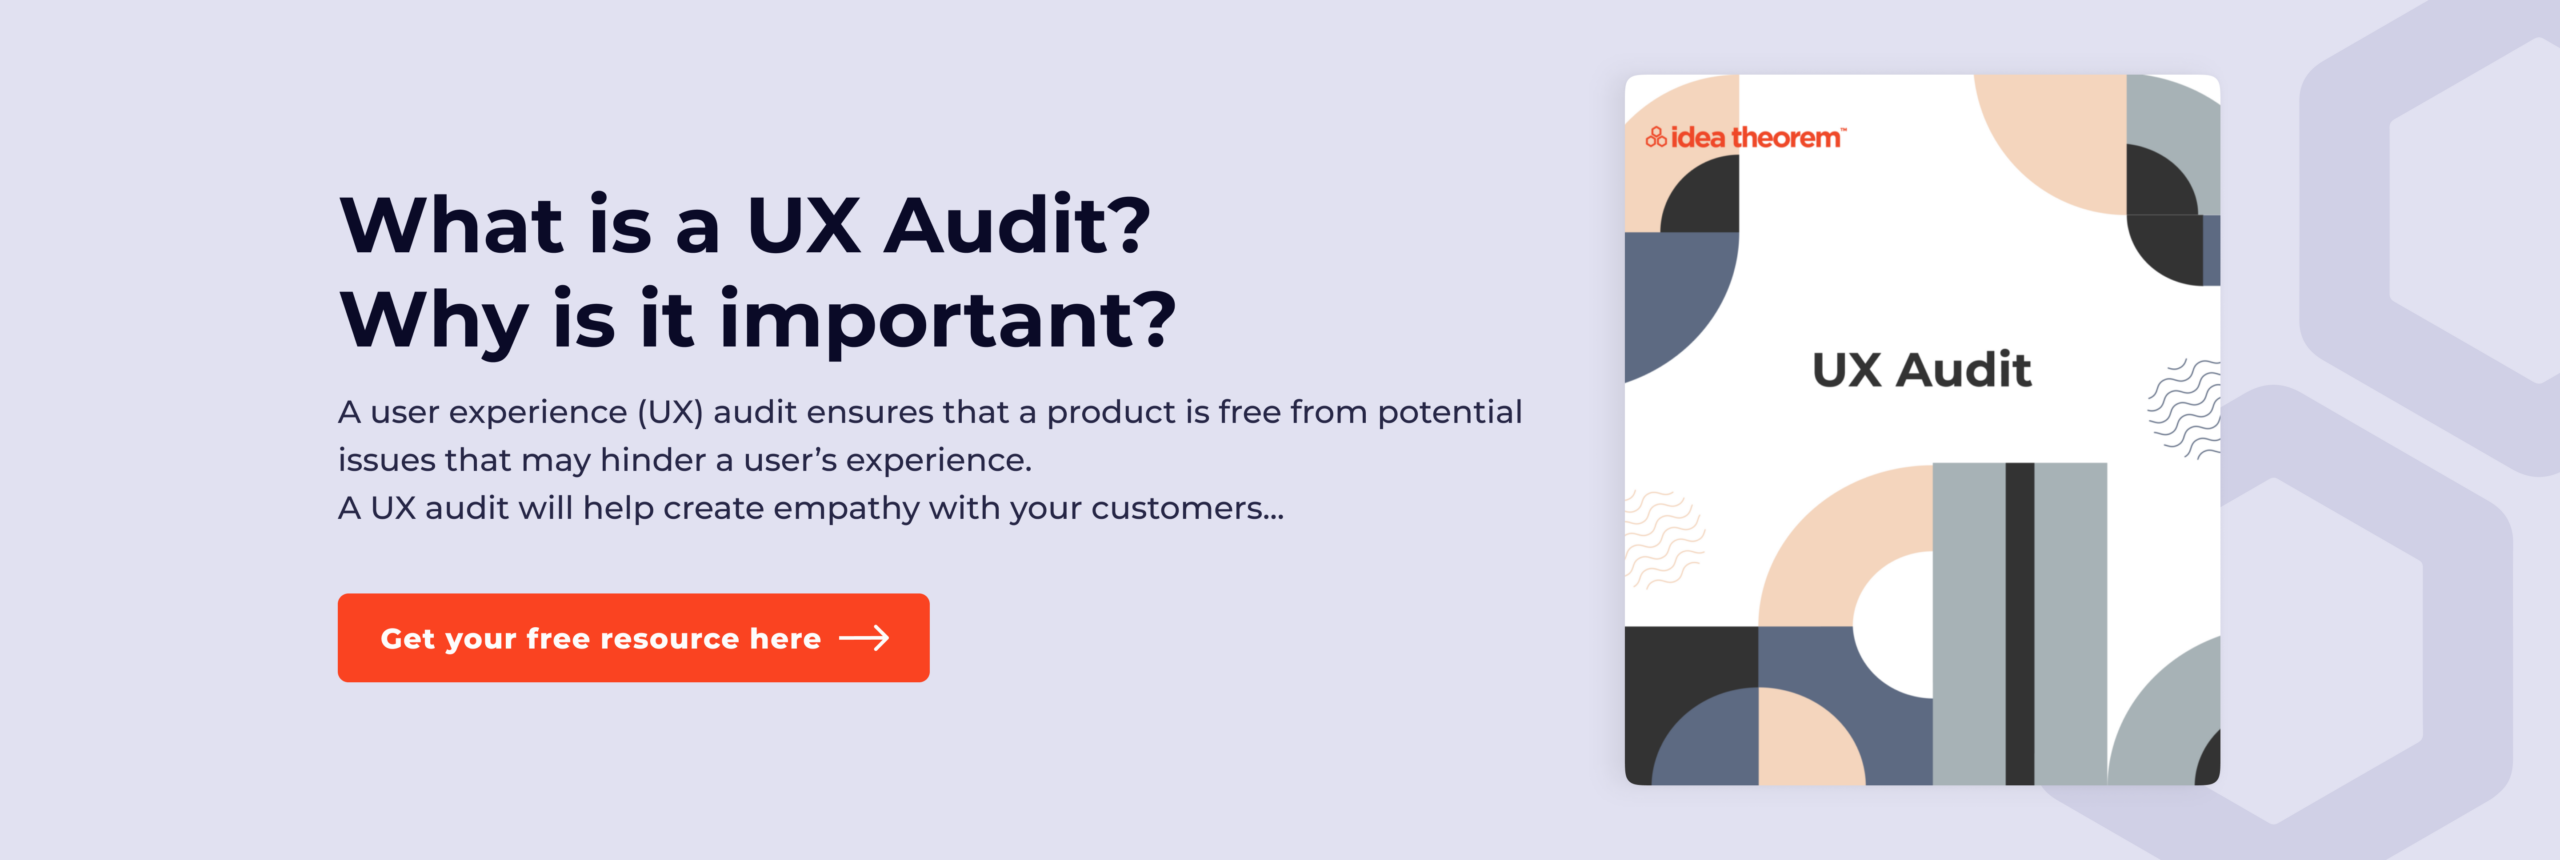 What is a UX audit and Why is it Important resource thumbnail by Idea Theorem